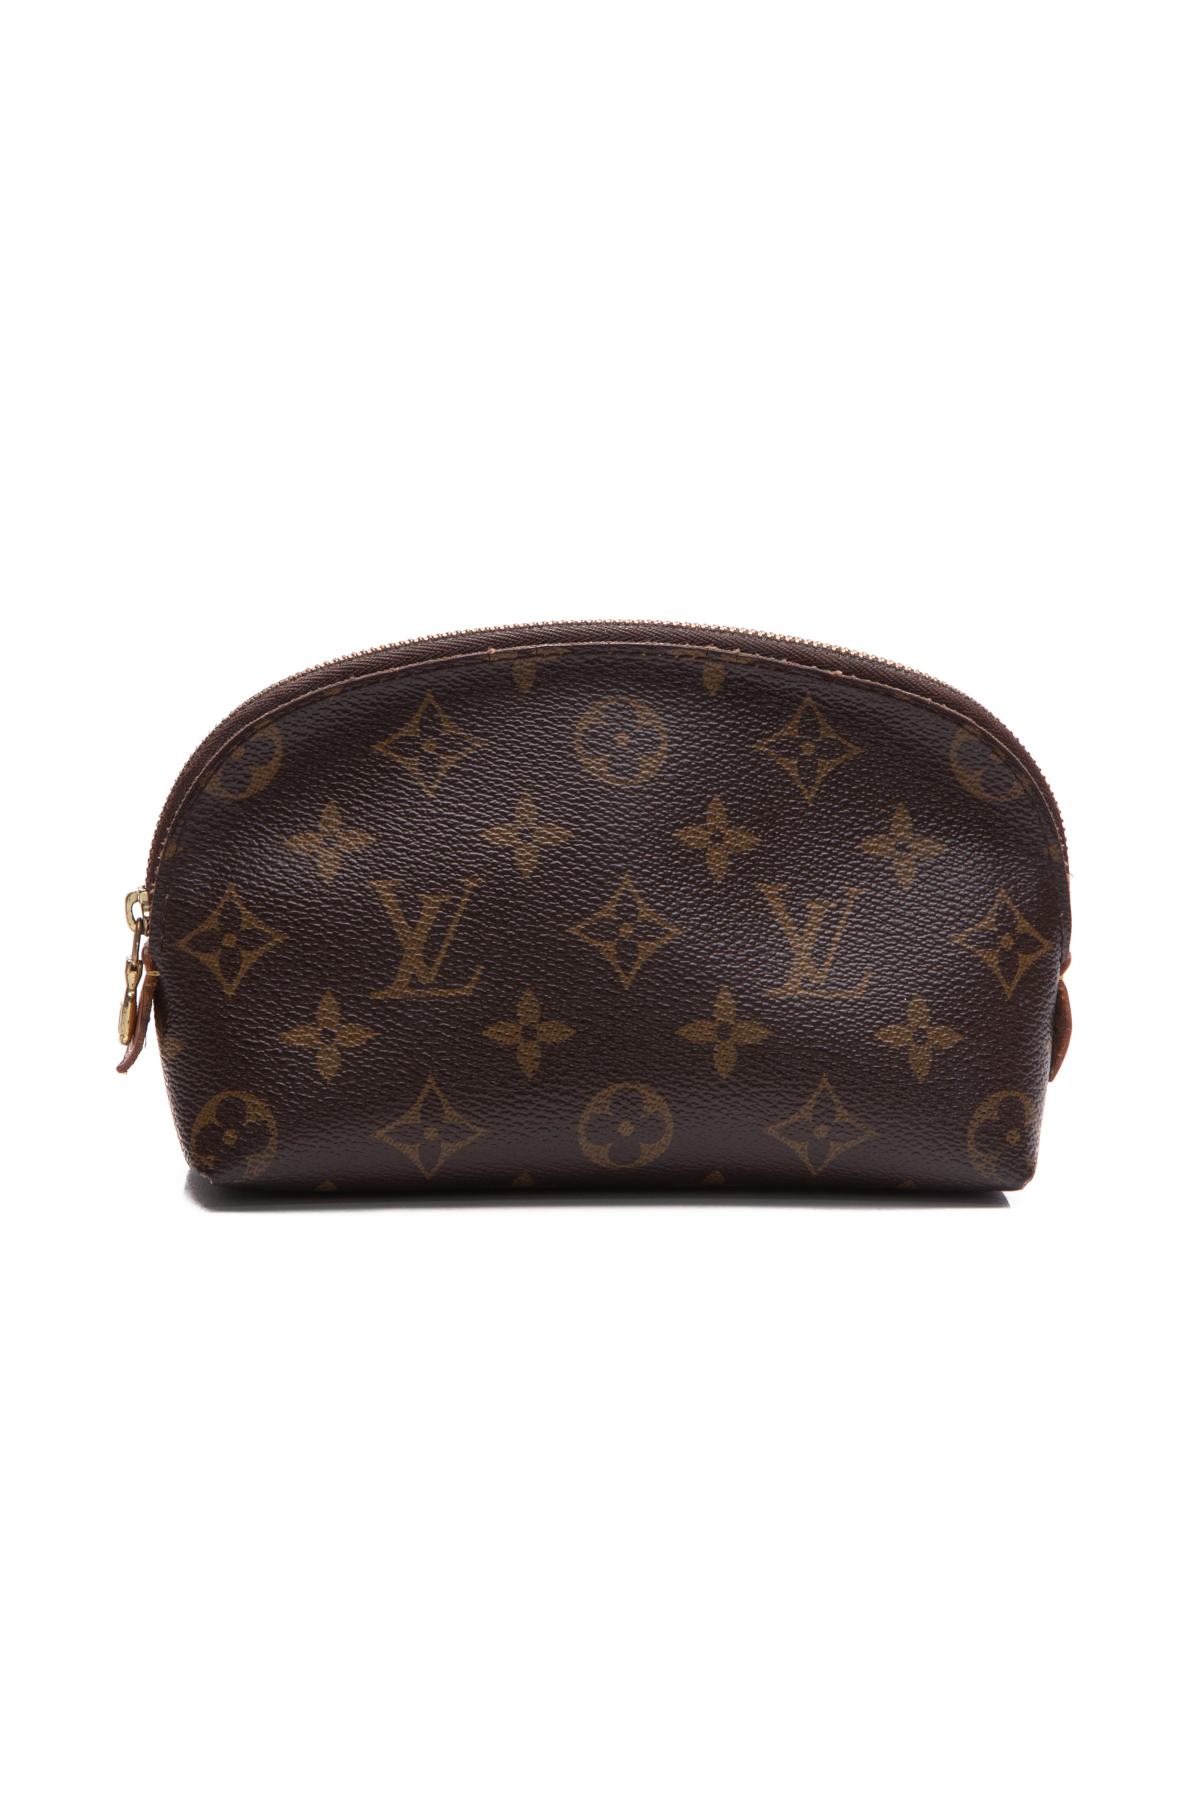 Louis Vuitton Cosmetics Pouch - Couture USA